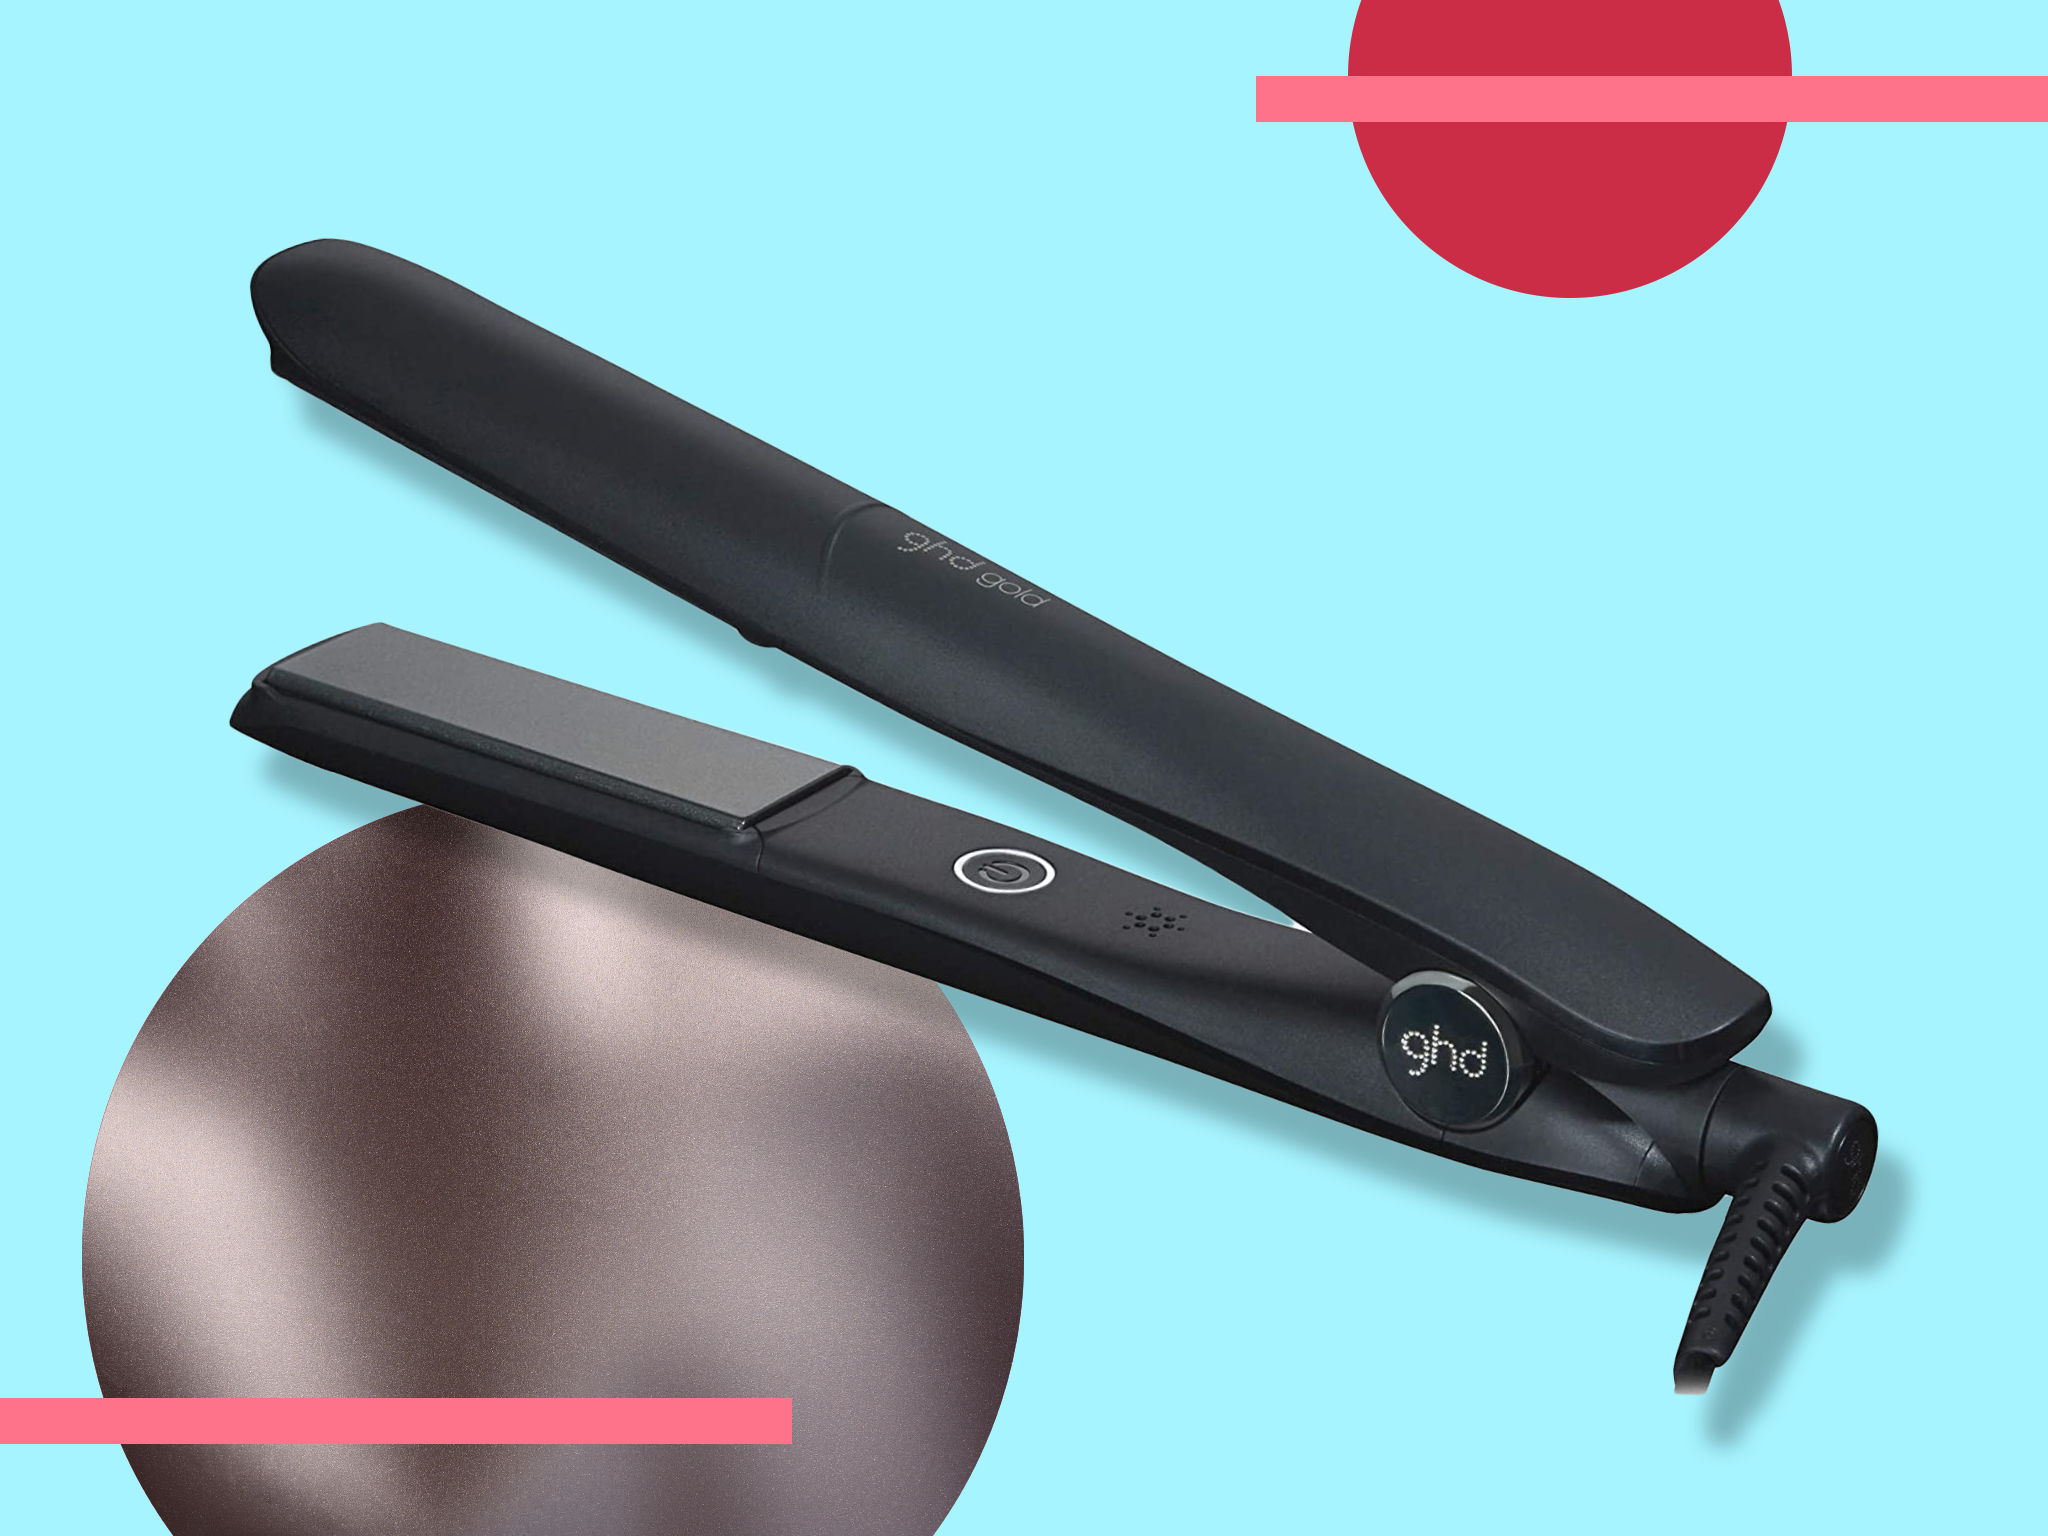 Amazon Prime Day 2 ghd straightener deal: Save a smooth 25 per cent on the  gold styler | The Independent